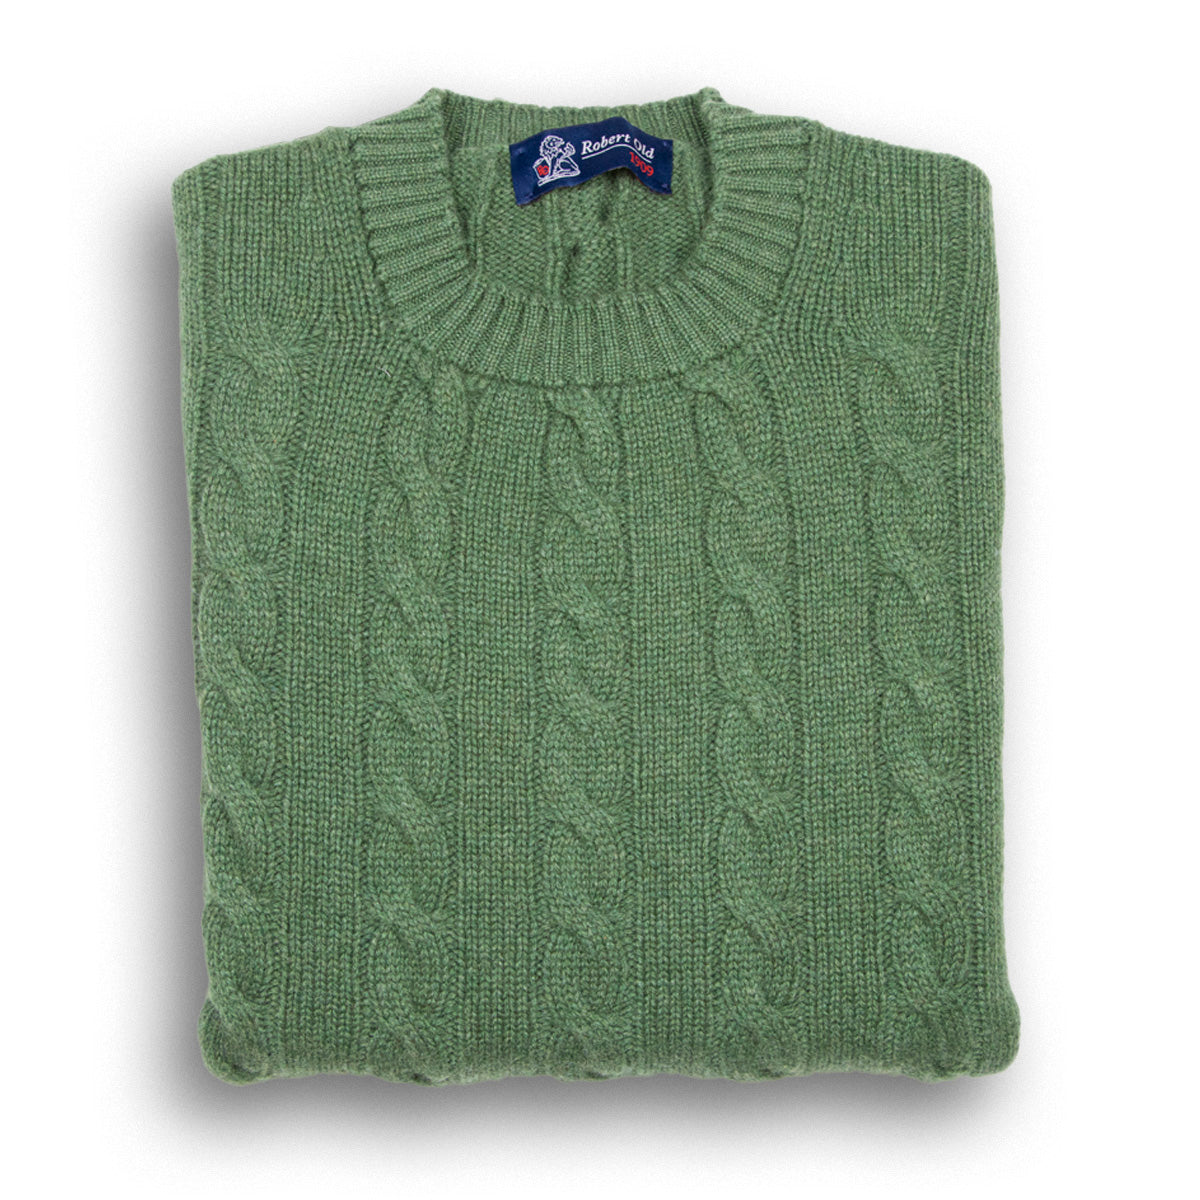 Serpentine Green Rothesay 4ply Cable Crew Cashmere Sweater  Robert Old Serpentine UK 38" 